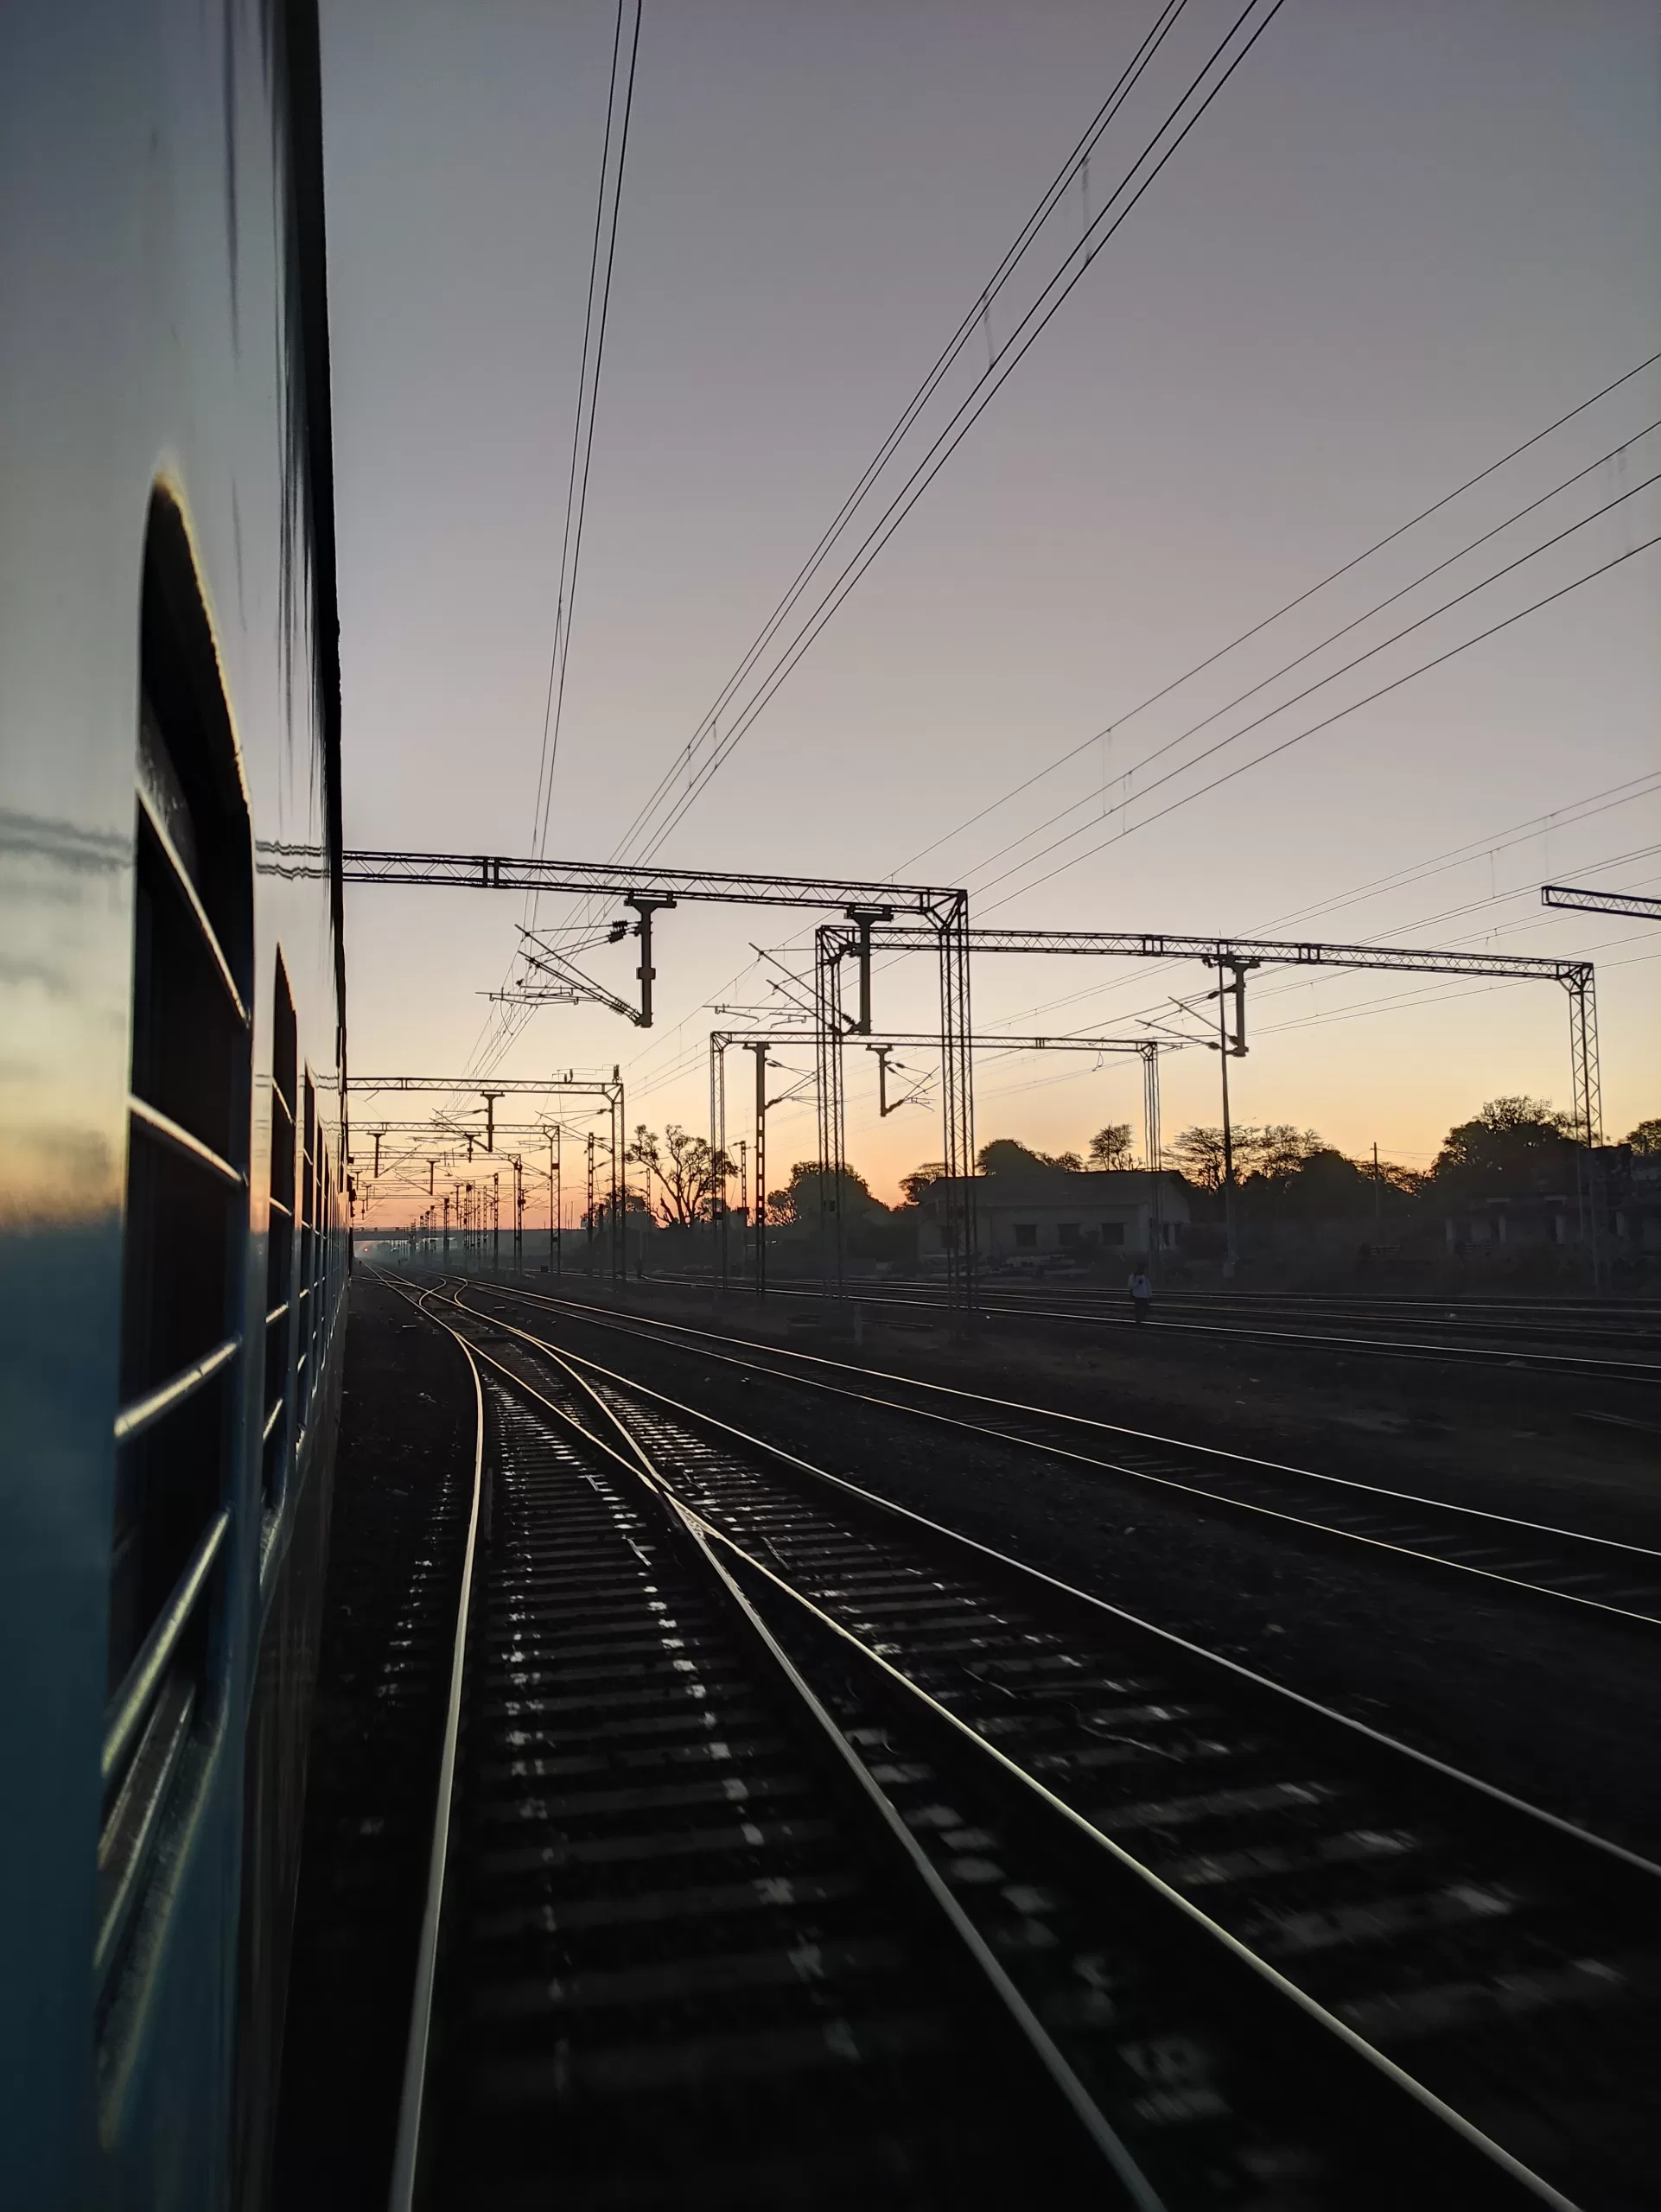 The outside of a train looking down the tracks at dusk